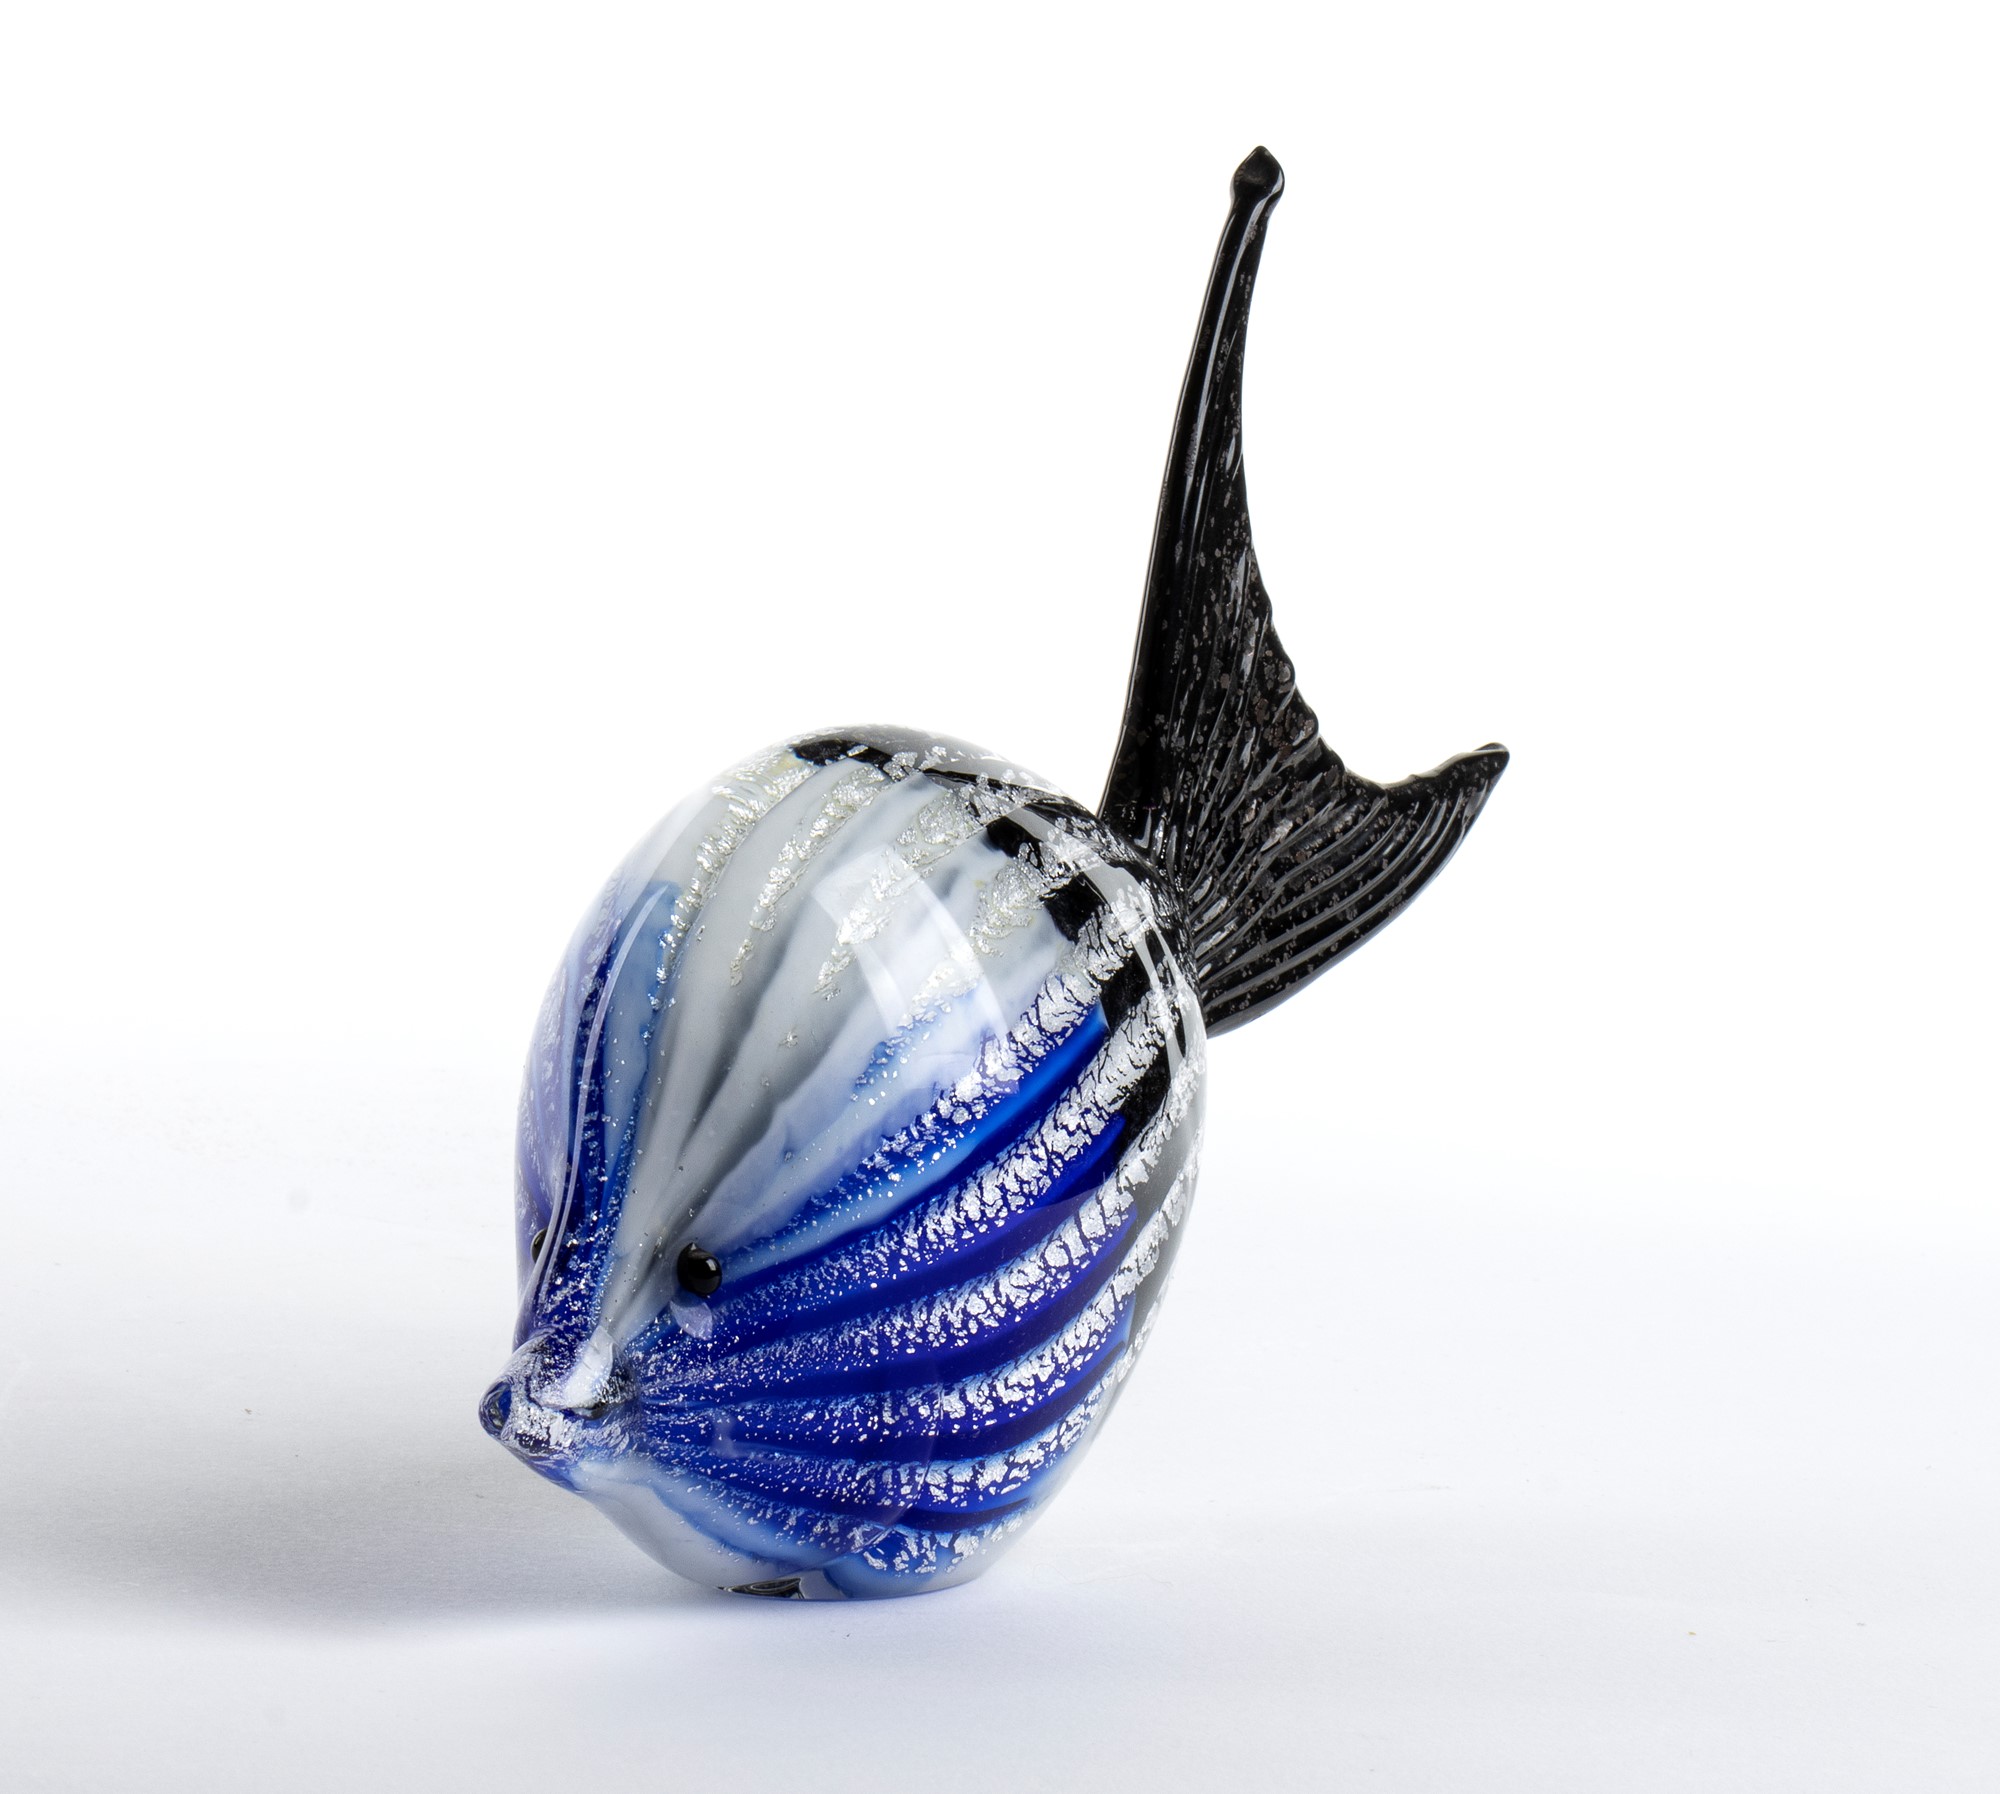 Small fish-shaped sculpture in Murano glass - Image 4 of 11